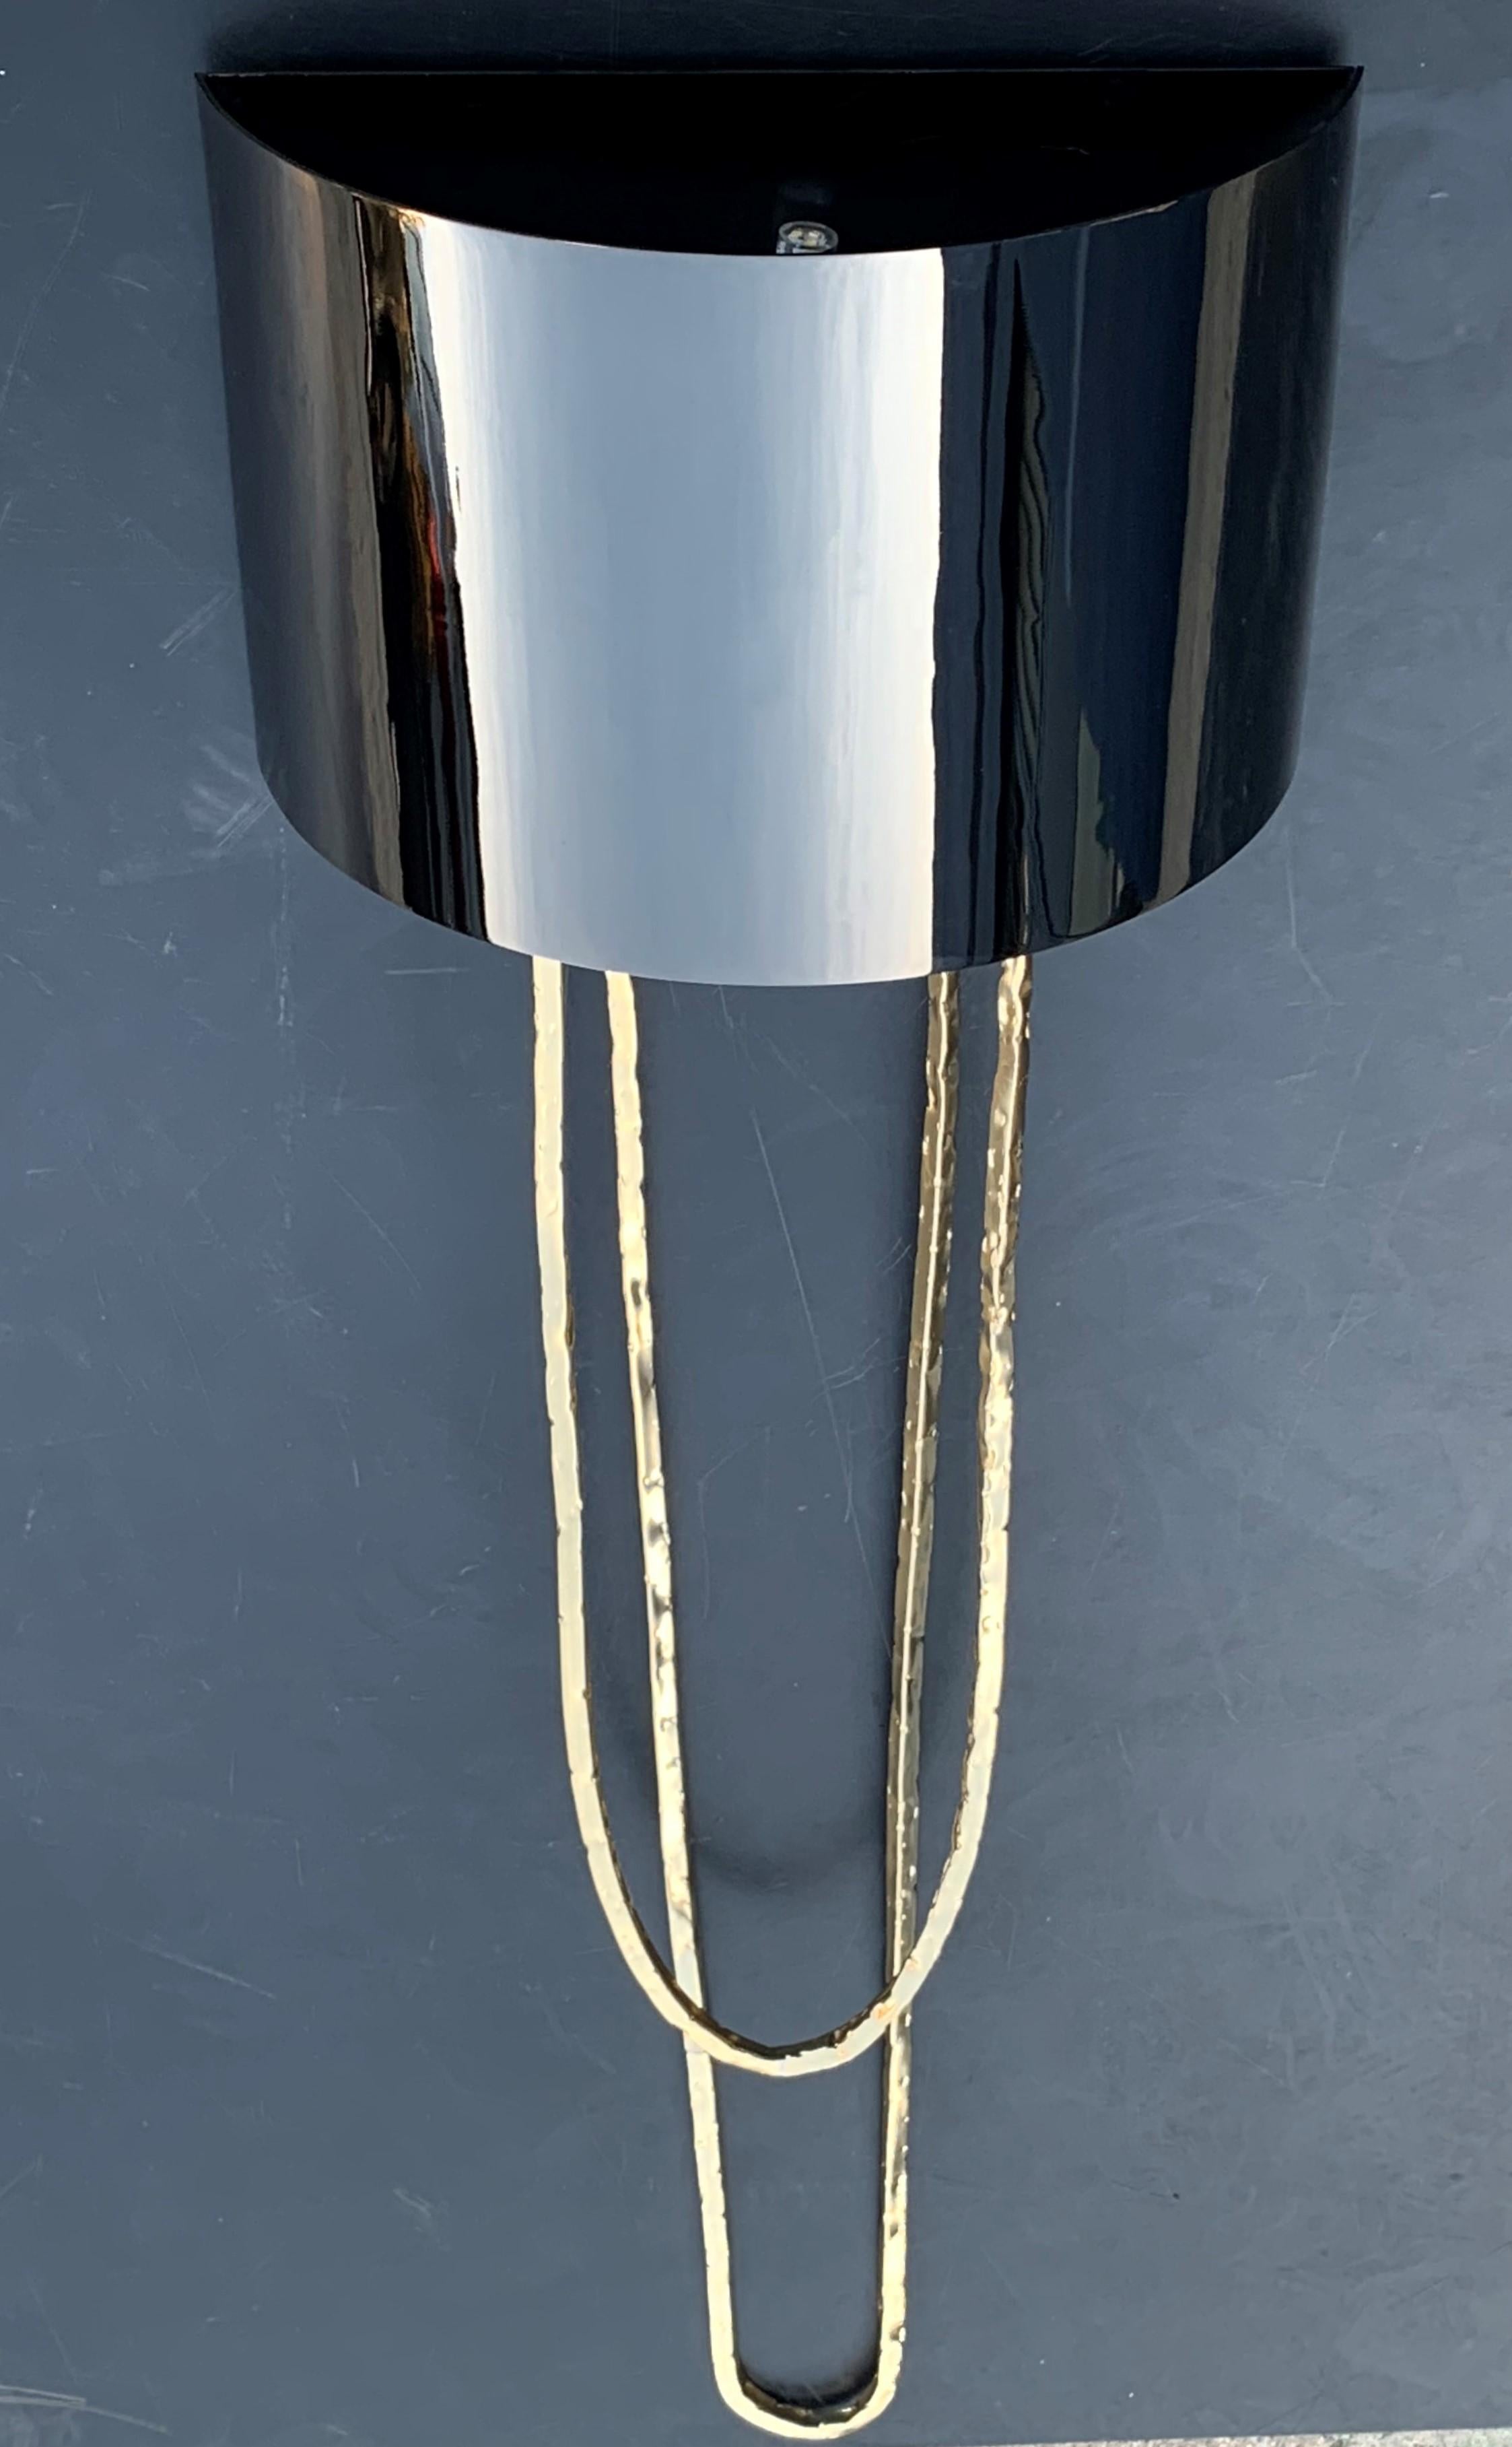 New pair of metal gold sconces with metal black chromed shade.